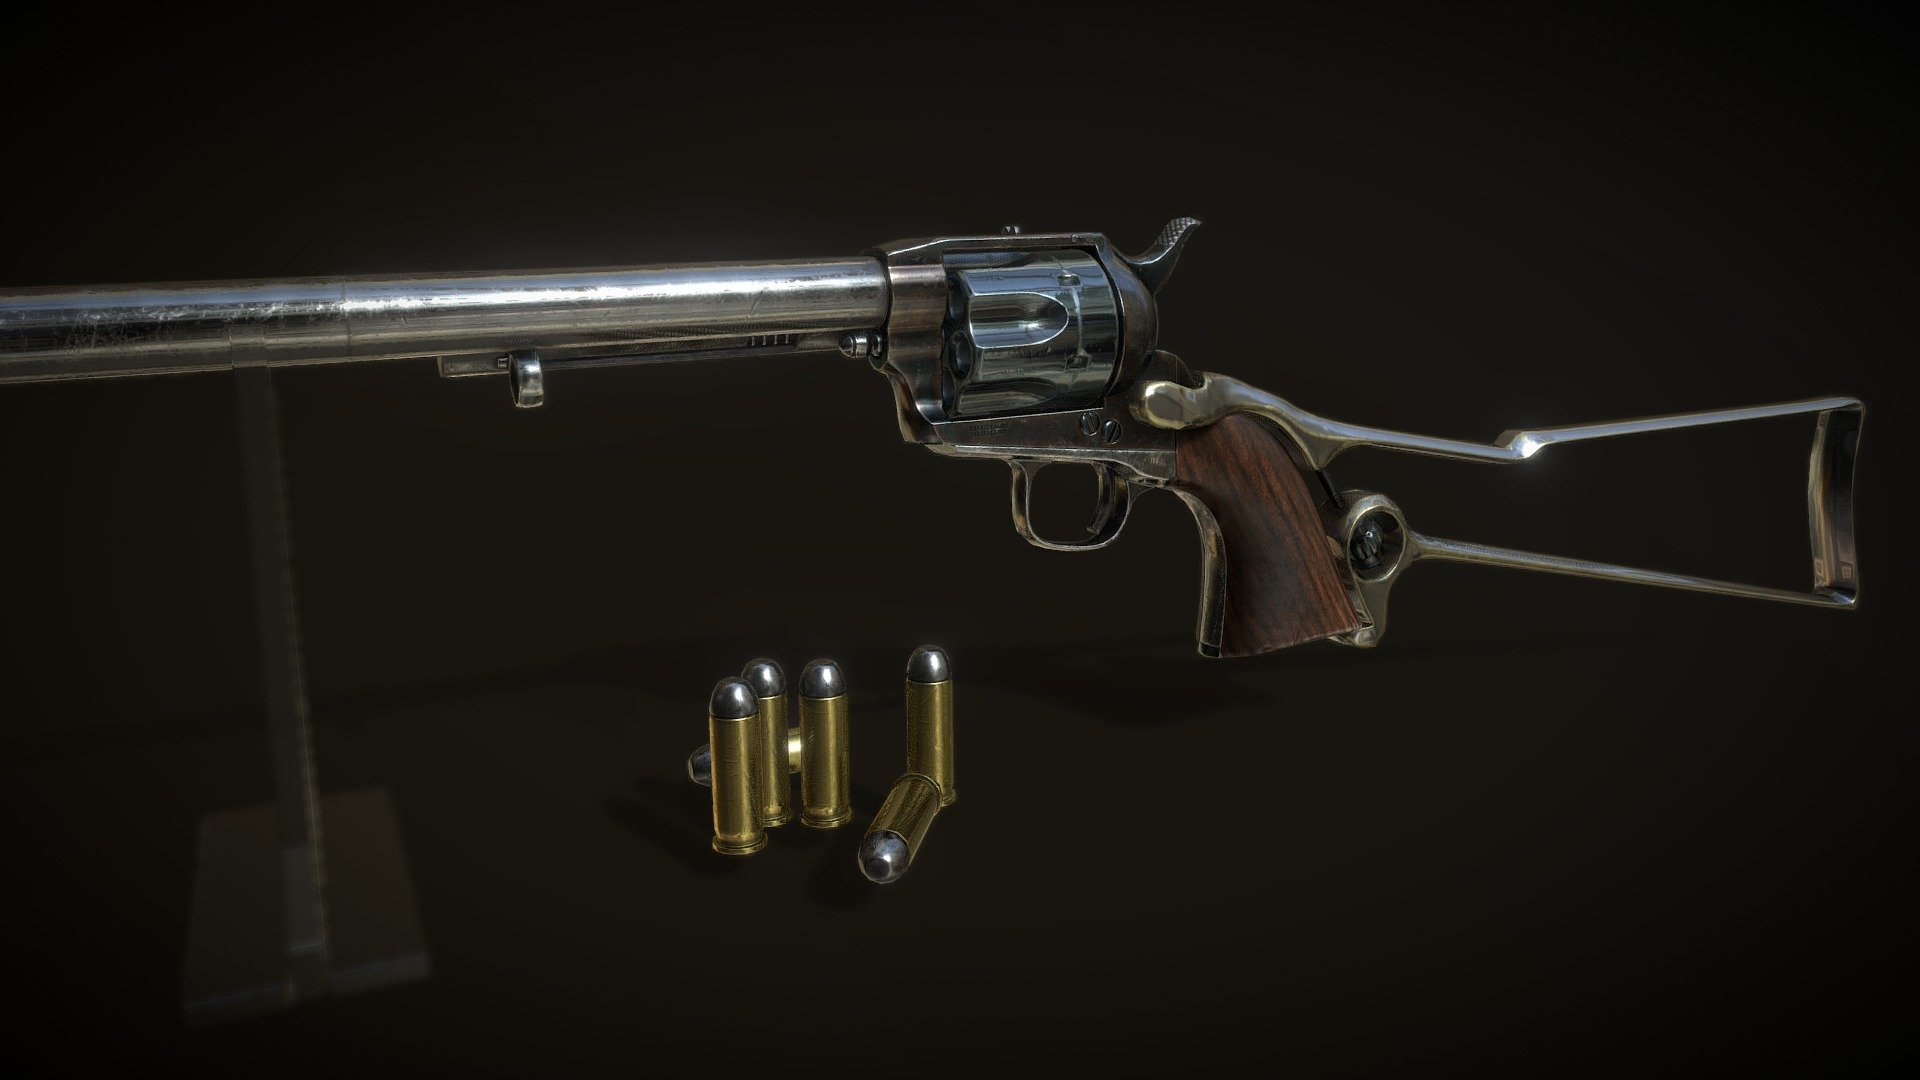 I wanted to challende myself and imerge into the story of this gun. So I learned all about the story of the Buntline Special, an interesting story.

This version is one of more “extra” variant, with that skeleton shoulder stock, 16” inch barrel and chambered in .45 caliber.

Created with Maya, Zbrush, and Substance Painter 3d model